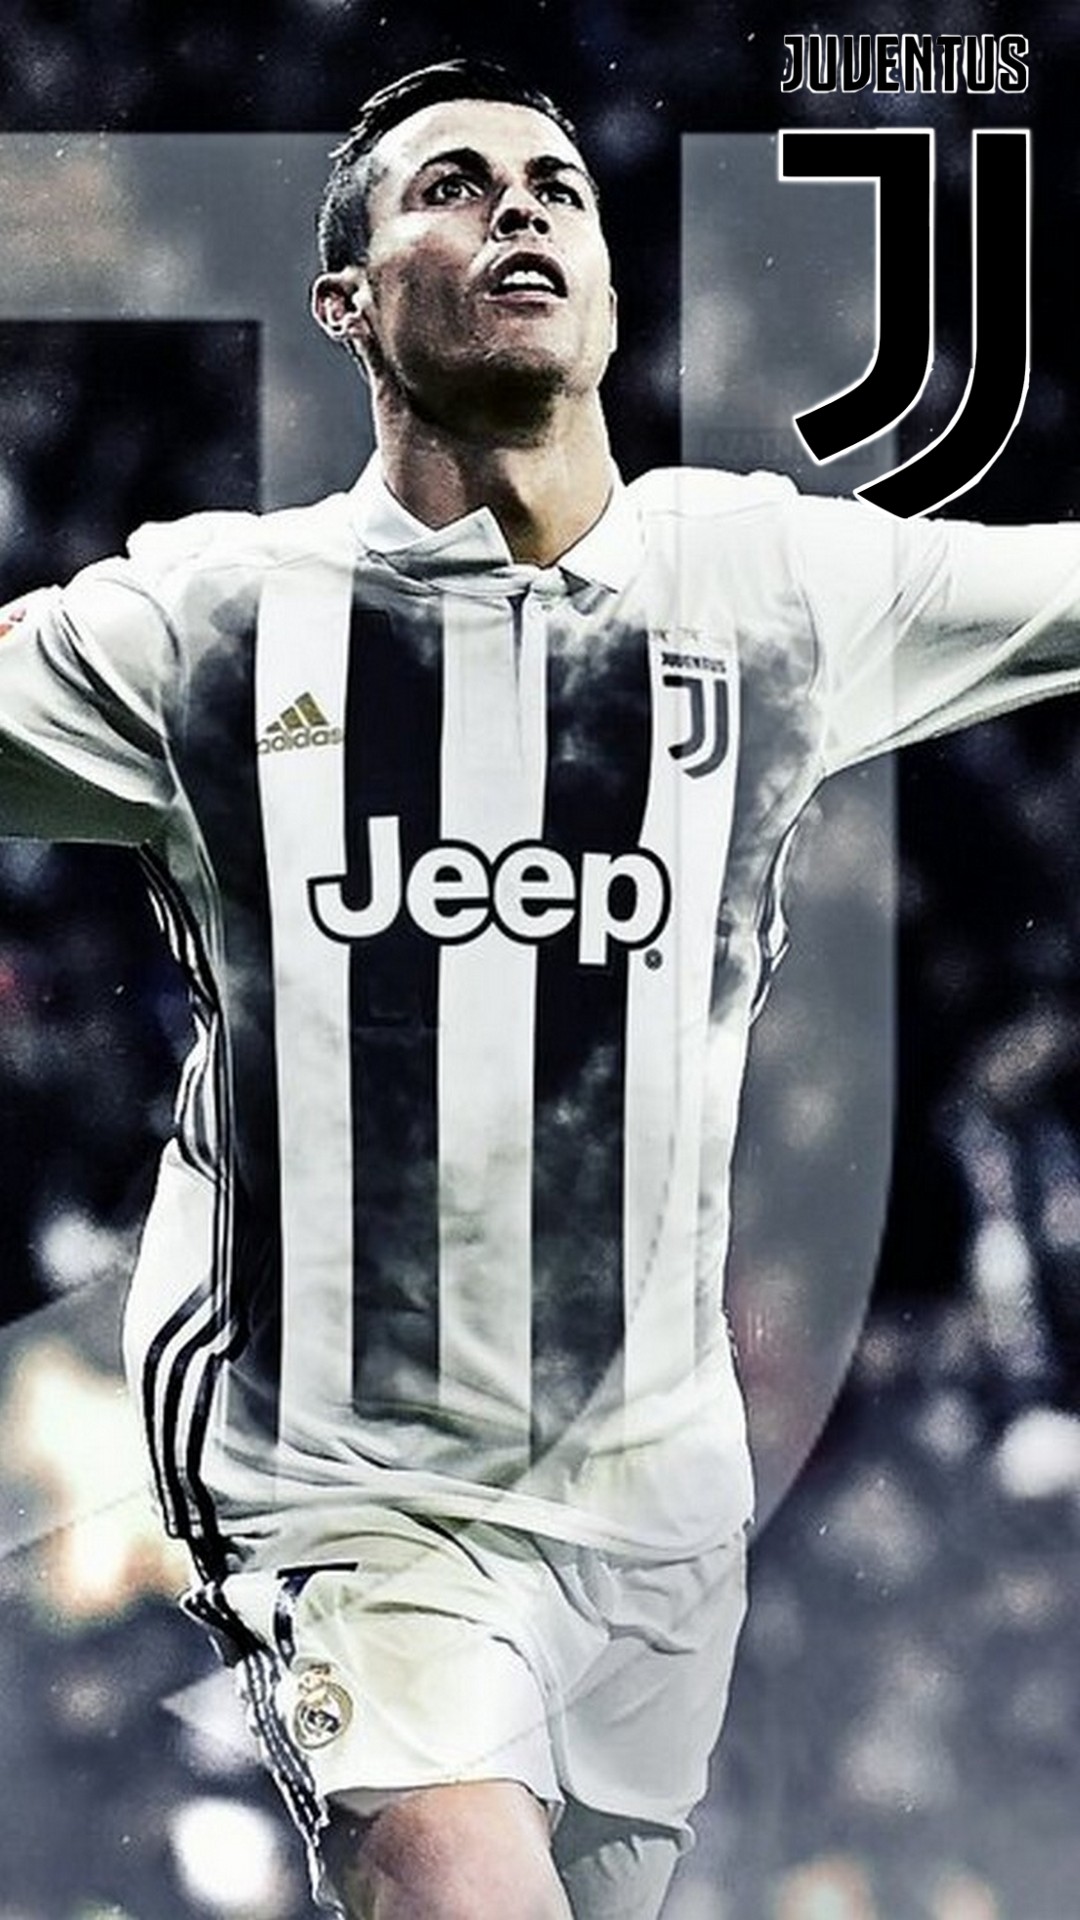 Cristiano Ronaldo Juventus Wallpaper iPhone HD With Resolution 1080X1920 pixel. You can make this wallpaper for your Mac or Windows Desktop Background, iPhone, Android or Tablet and another Smartphone device for free